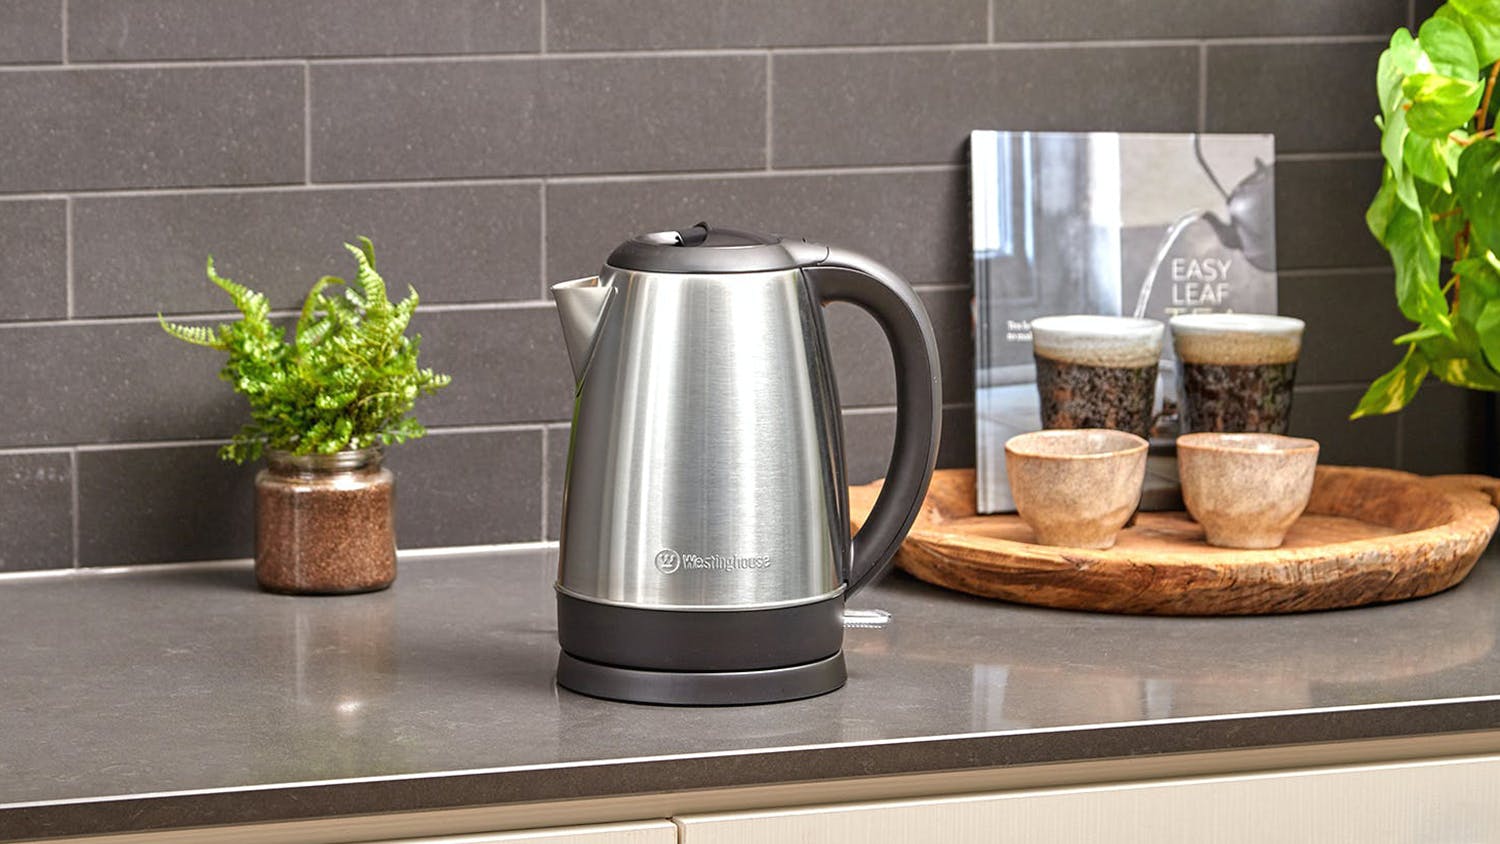 Westinghouse 1.7L Kettle - Brushed Stainless Steel Black